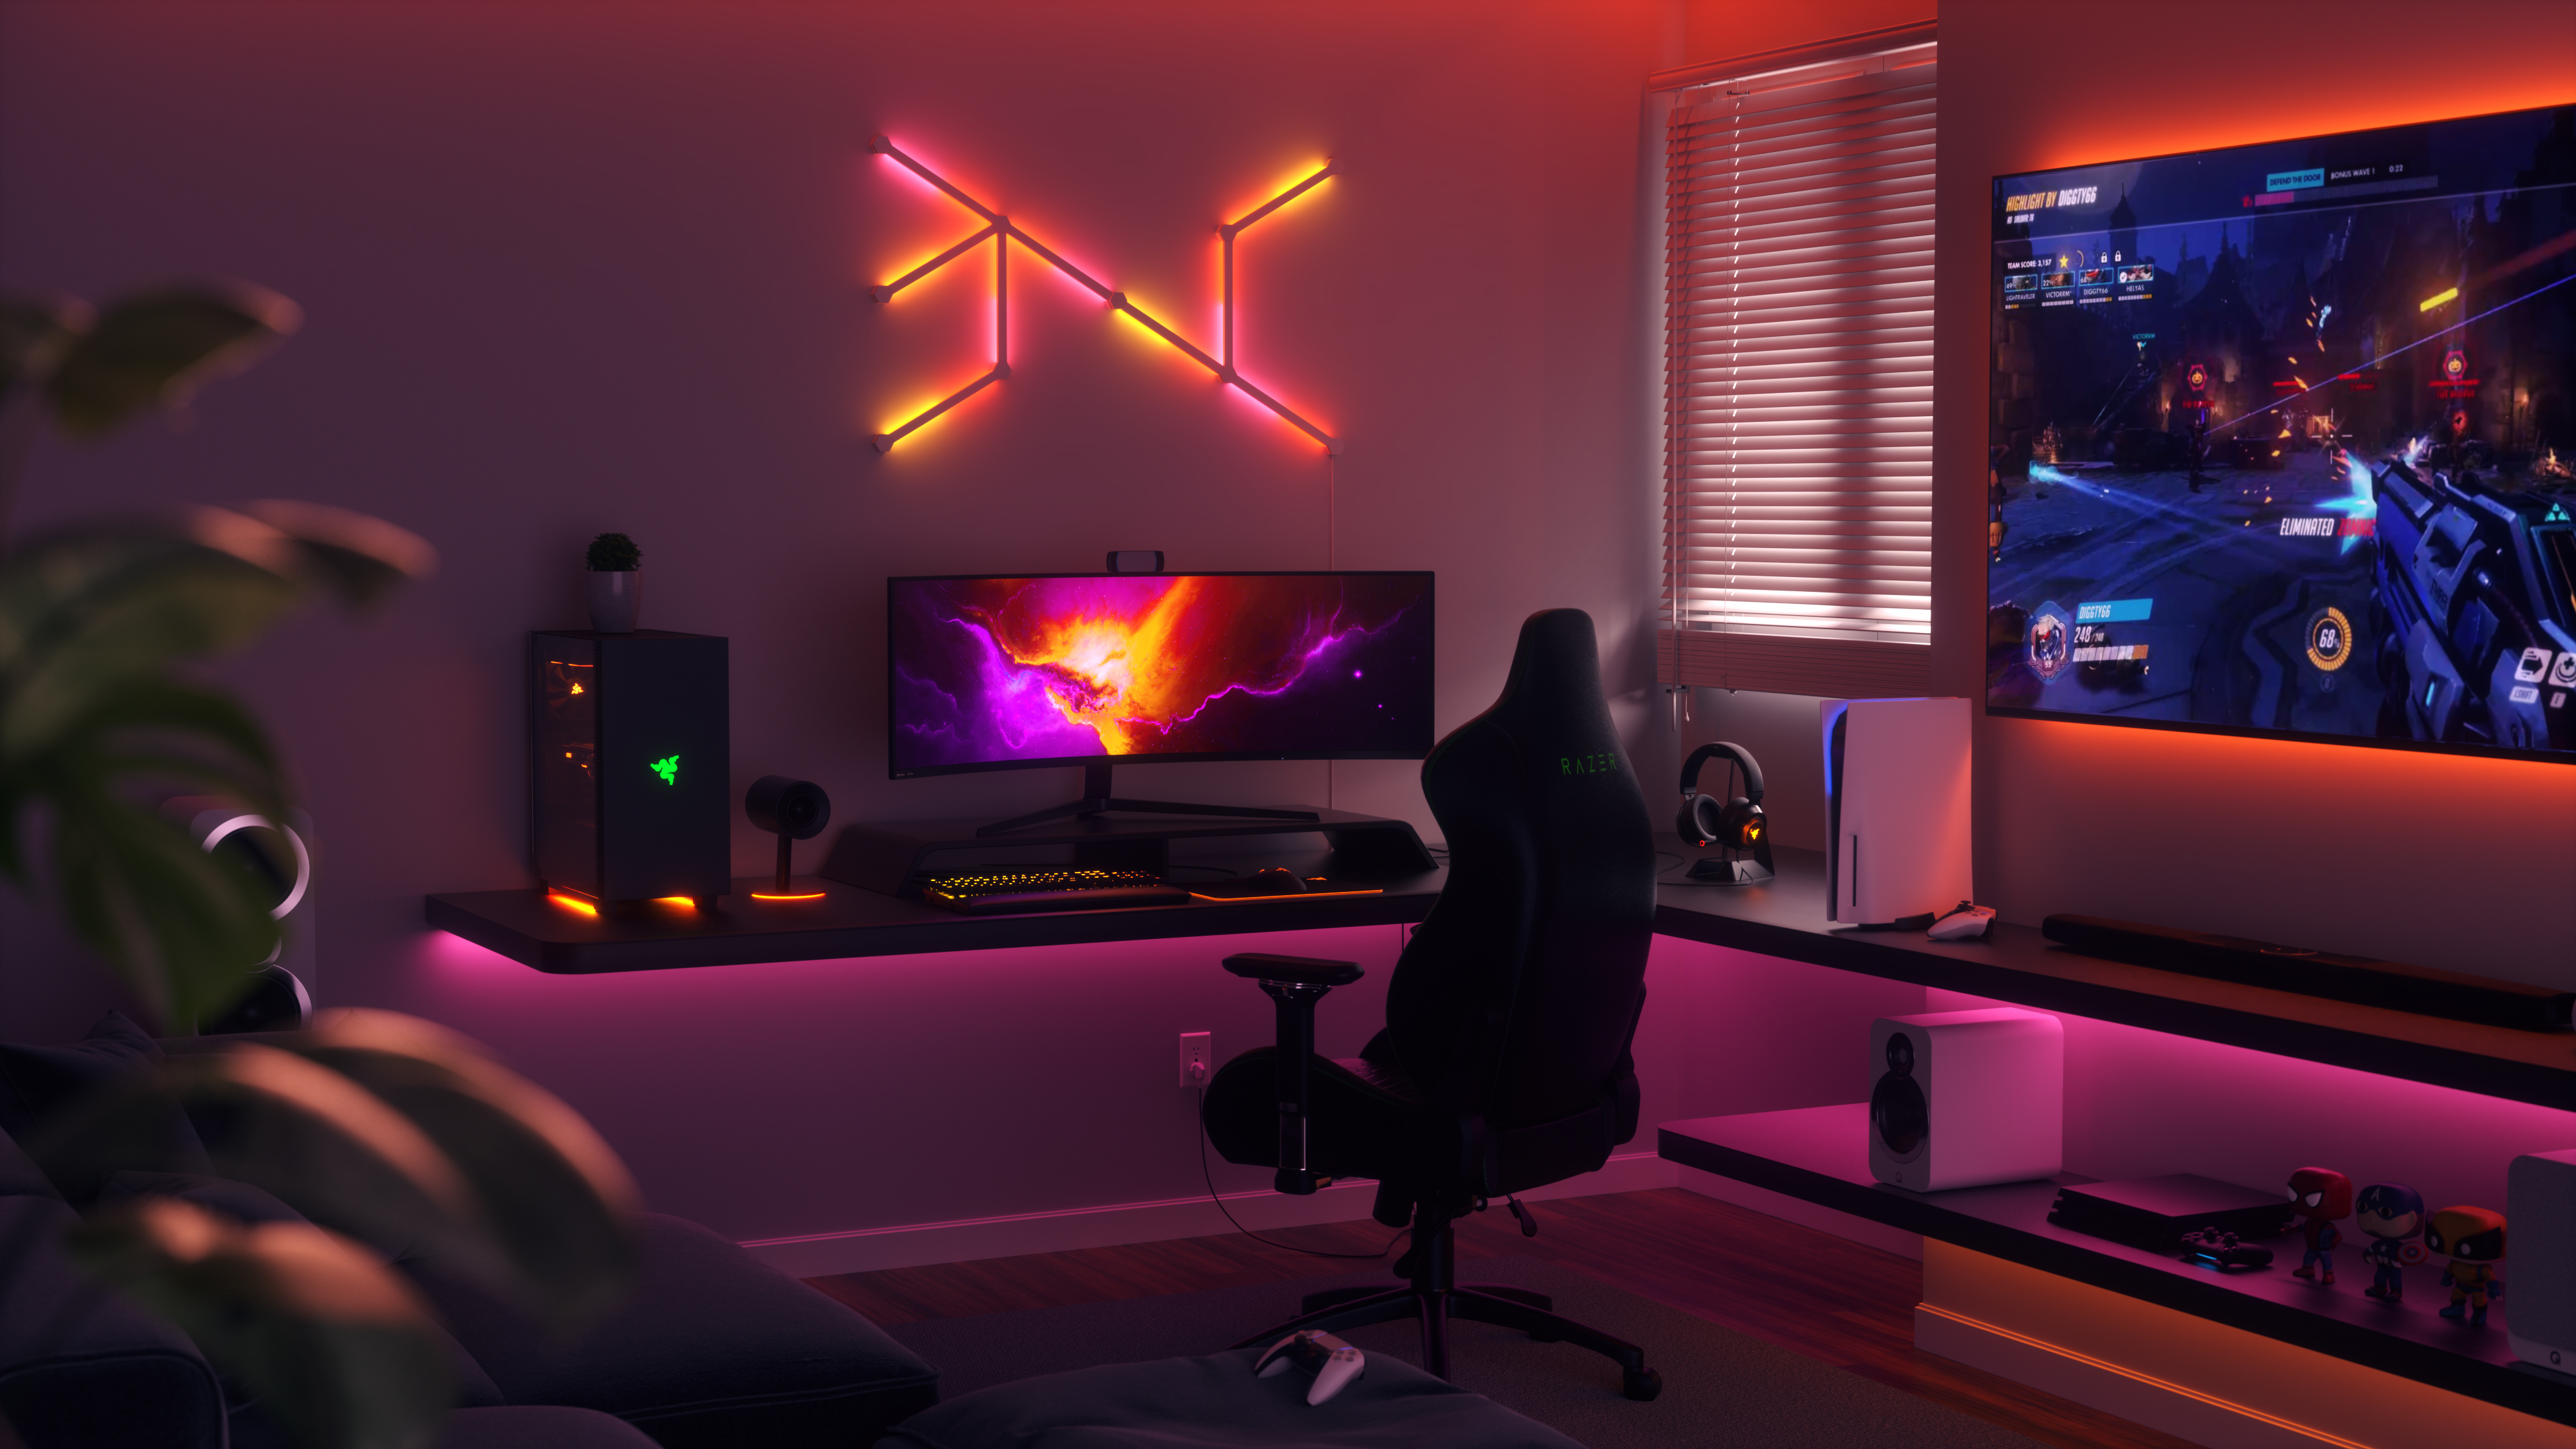 Nanoleaf up your current gaming setup with Lines for a sleek “grown up” RGB vibe. Where in your setup would you put them up?